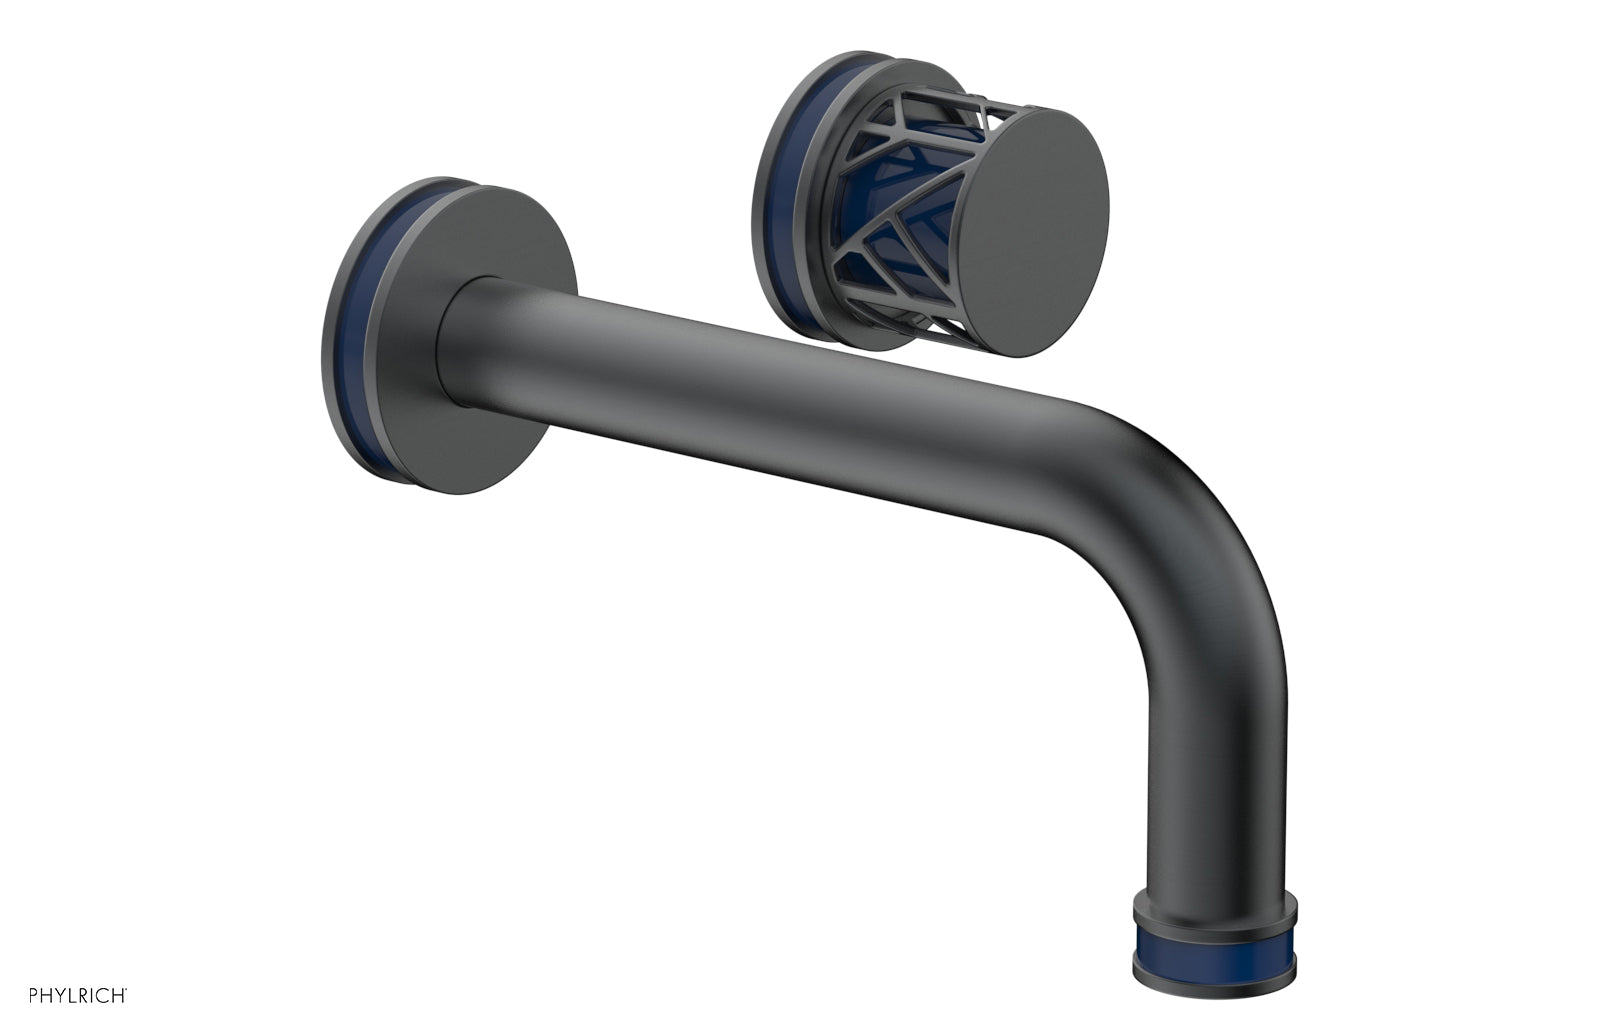 Phylrich JOLIE Single Handle Wall Lavatory Set - Round Handle "Navy Blue" Accents